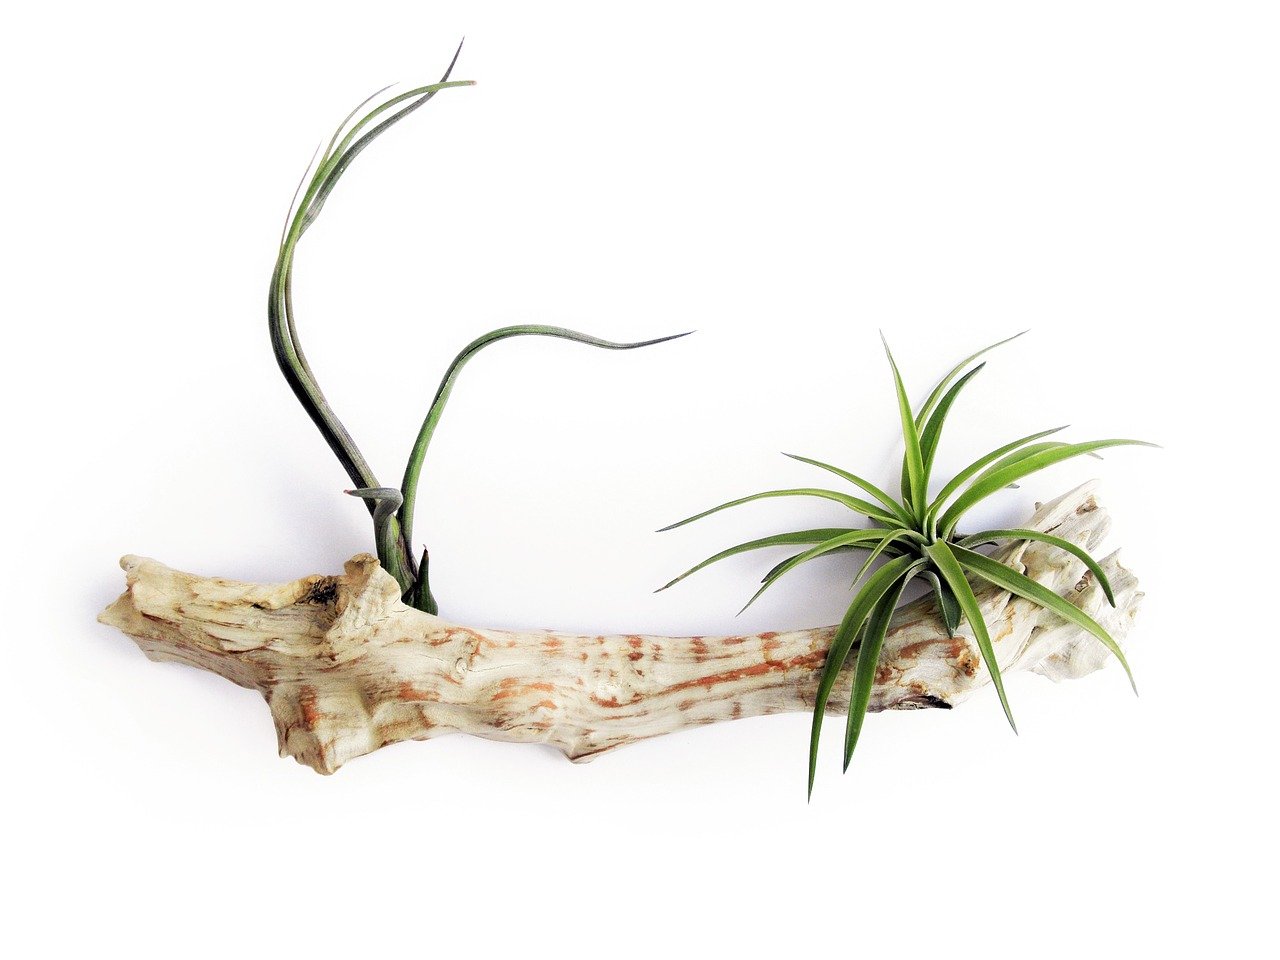 Top 8 Garden Expert Tips for Growing Air Plants that You shouldn't Miss!